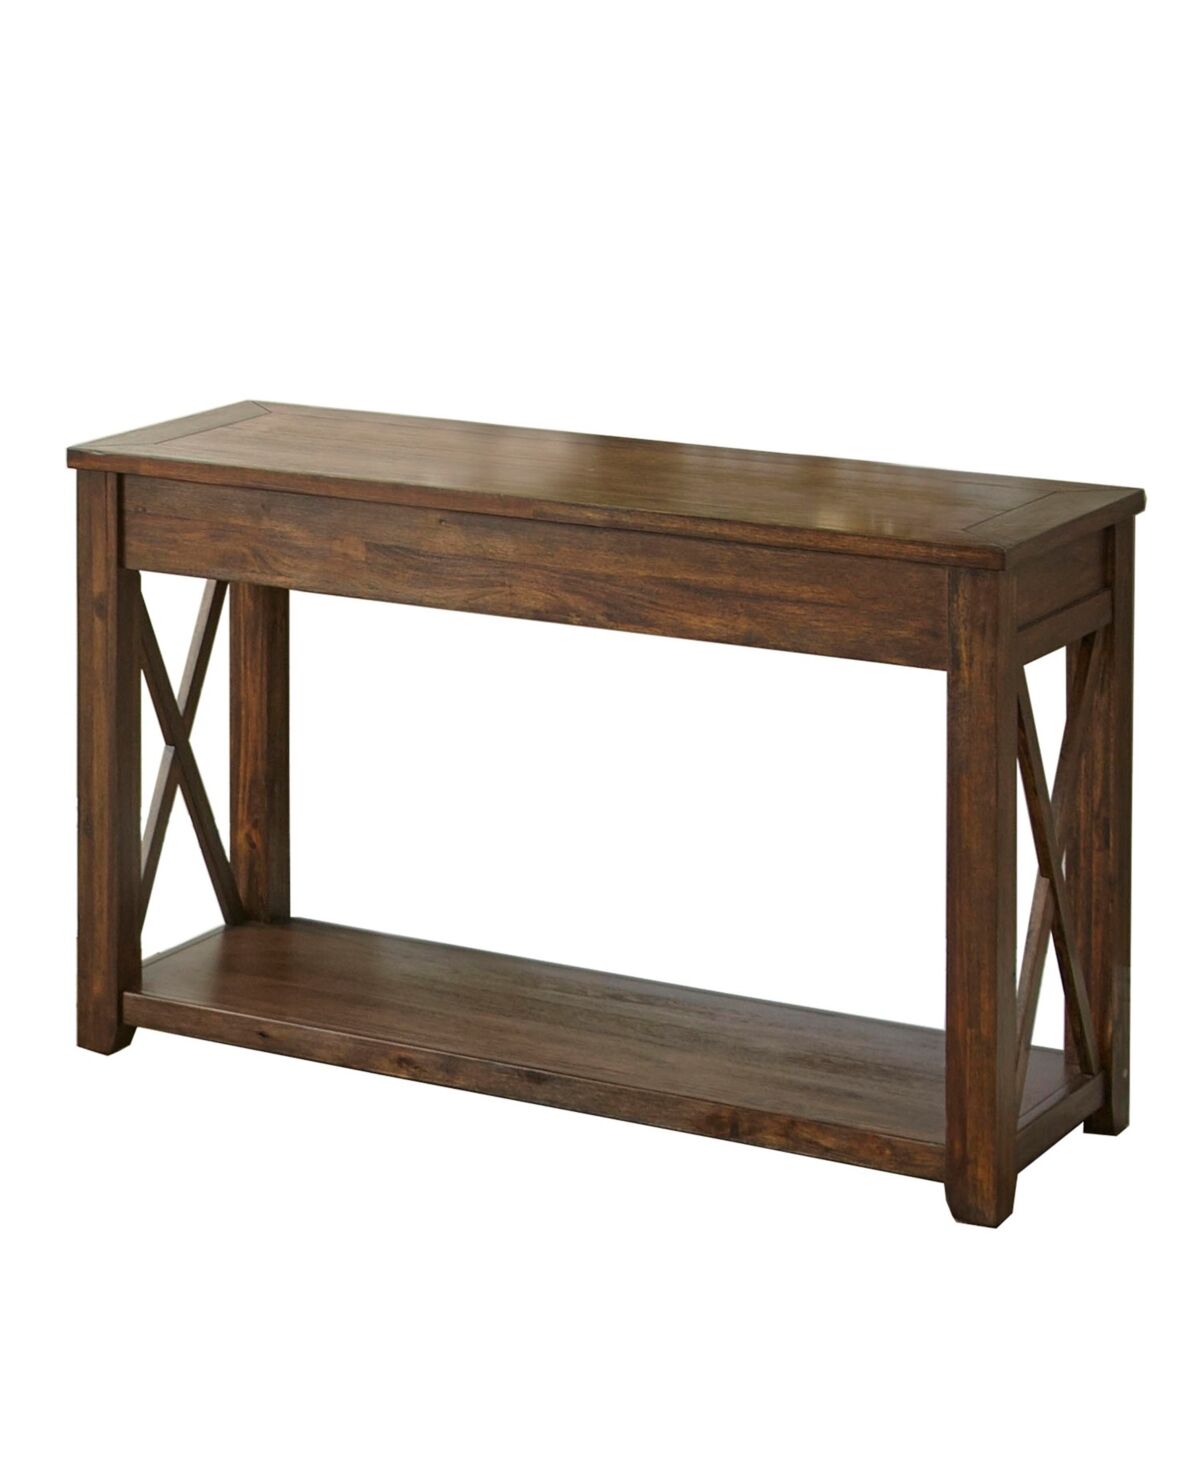 Furniture Loxley Sofa Table - Brown